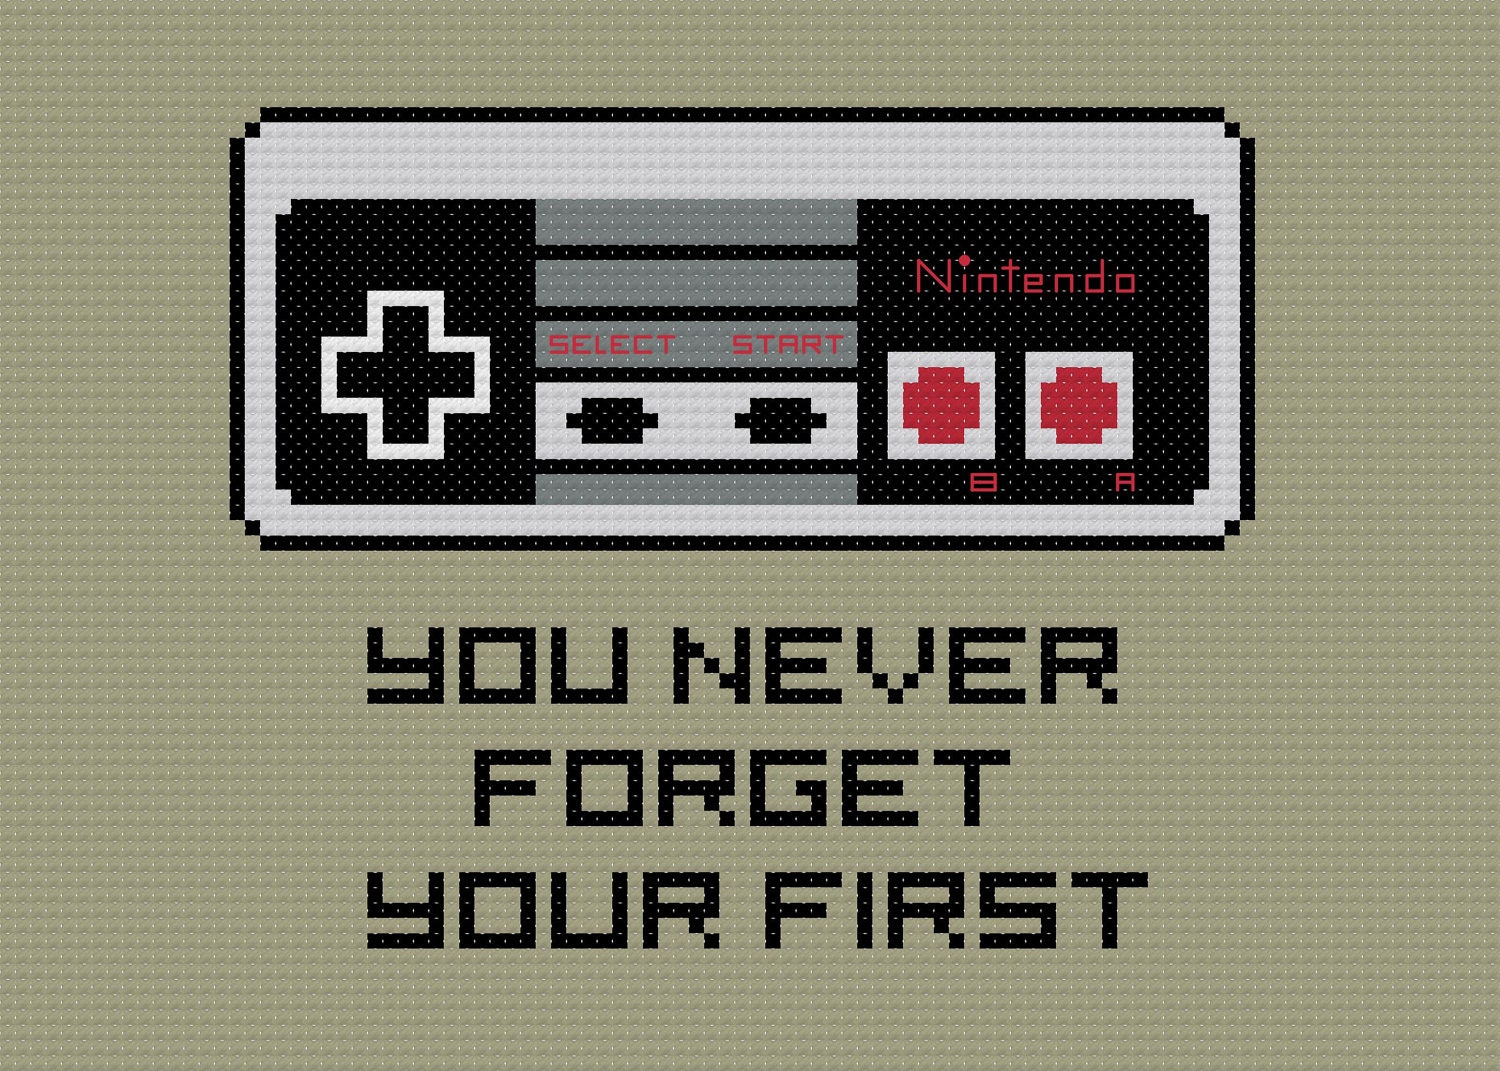 You Never Forget - Nintendo - PDF Cross-stitch Pattern - INSTANT DOWNLOAD